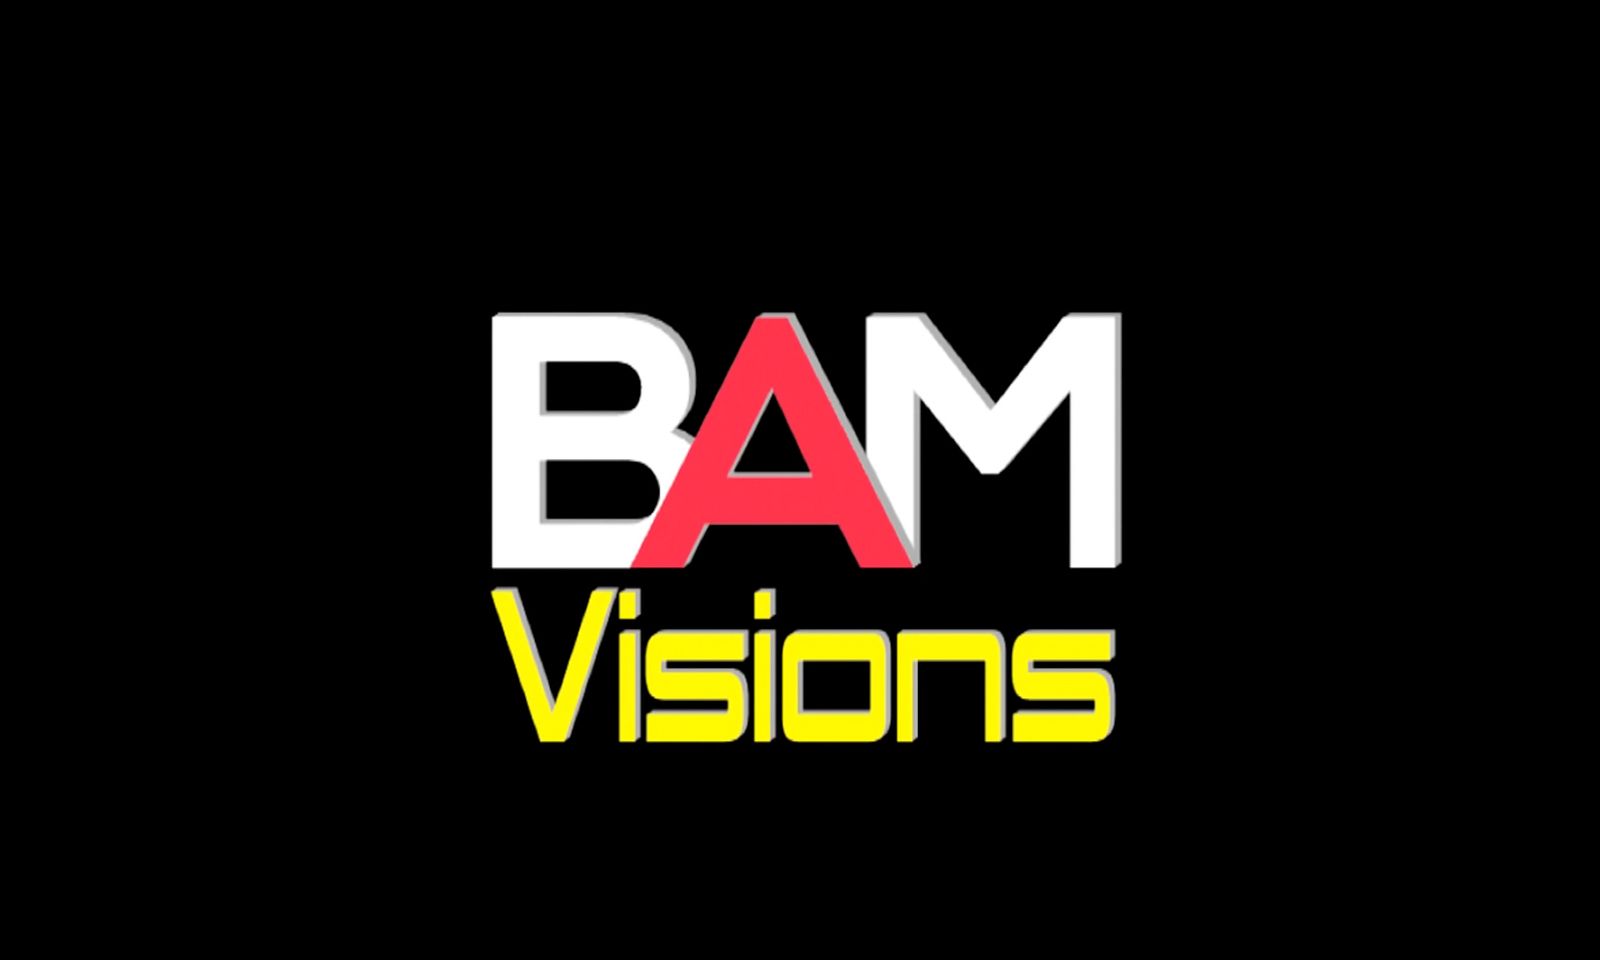 BAM Visions Receives XRCO Awards Nom for Best Gonzo Movie